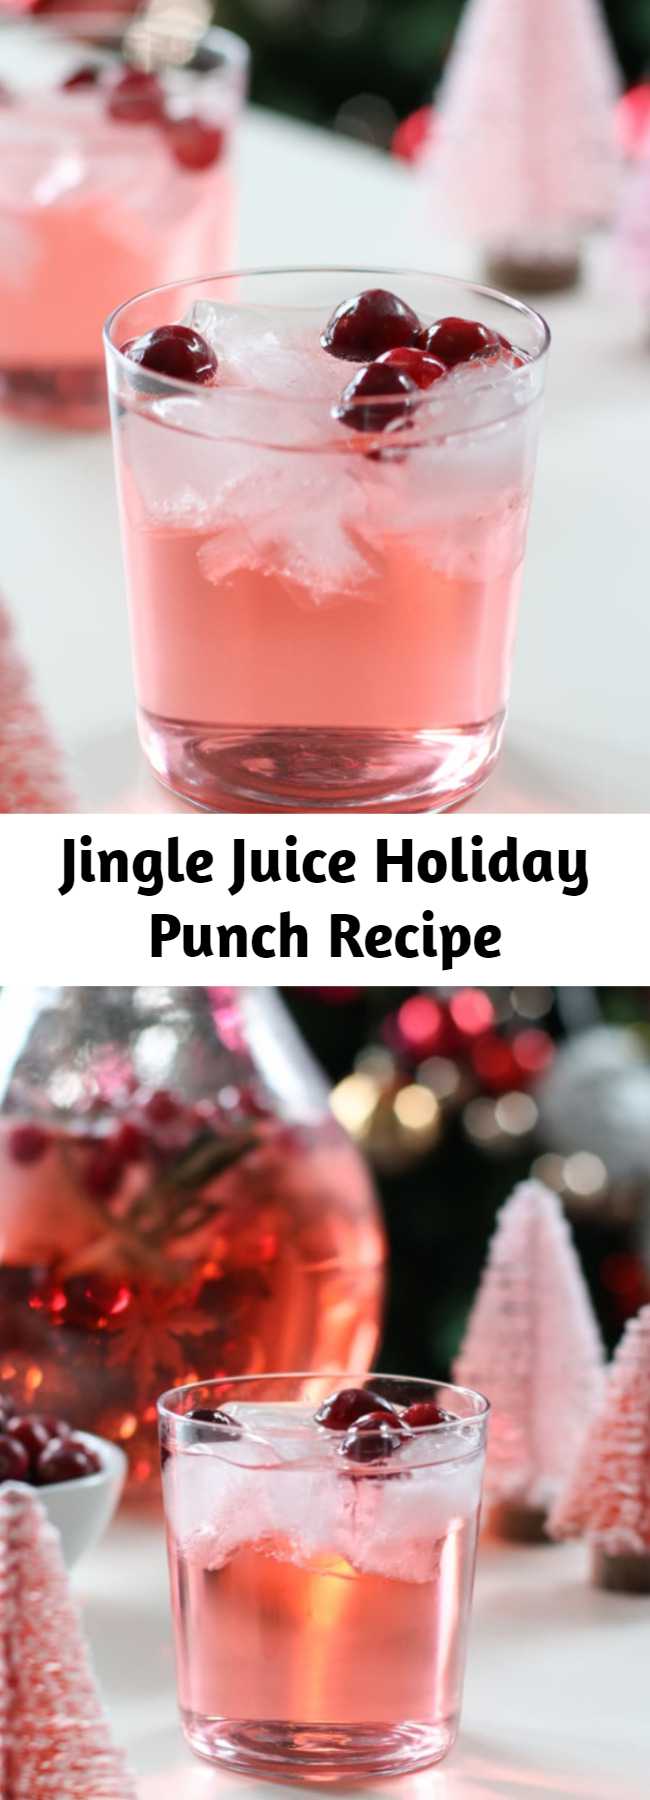 Jingle Juice Holiday Punch Recipe - This Jingle Juice Holiday Punch recipe is simple, delicious, and beautiful! You only need three ingredients to craft this delicious holiday punch recipe everyone will love!